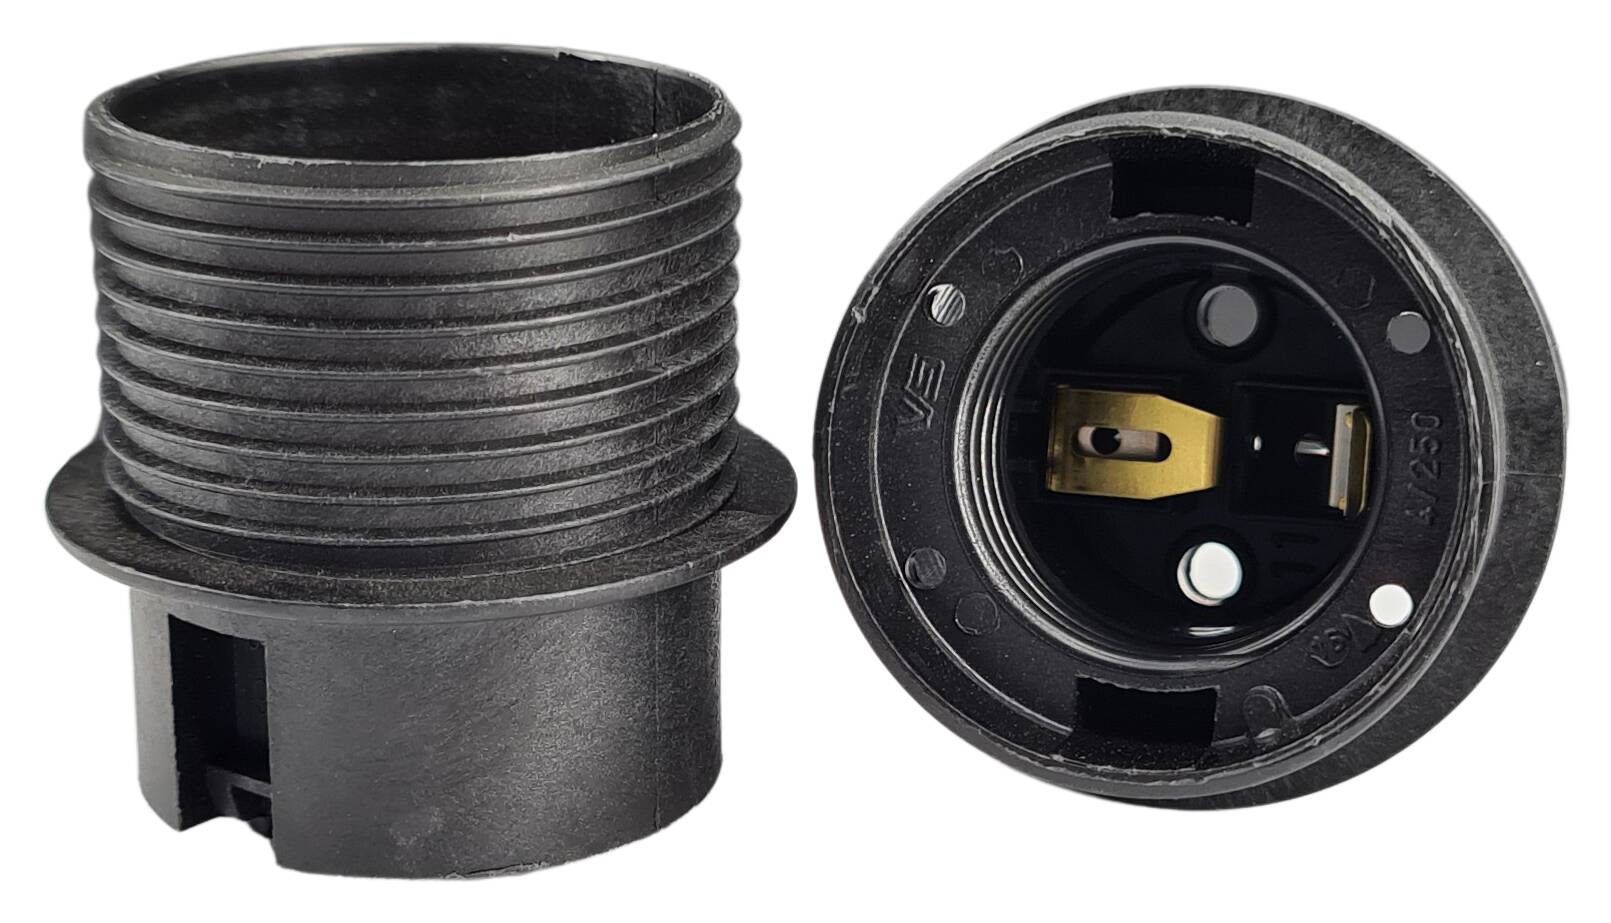 E27 partial-threaded for thermoplastic lampholder black